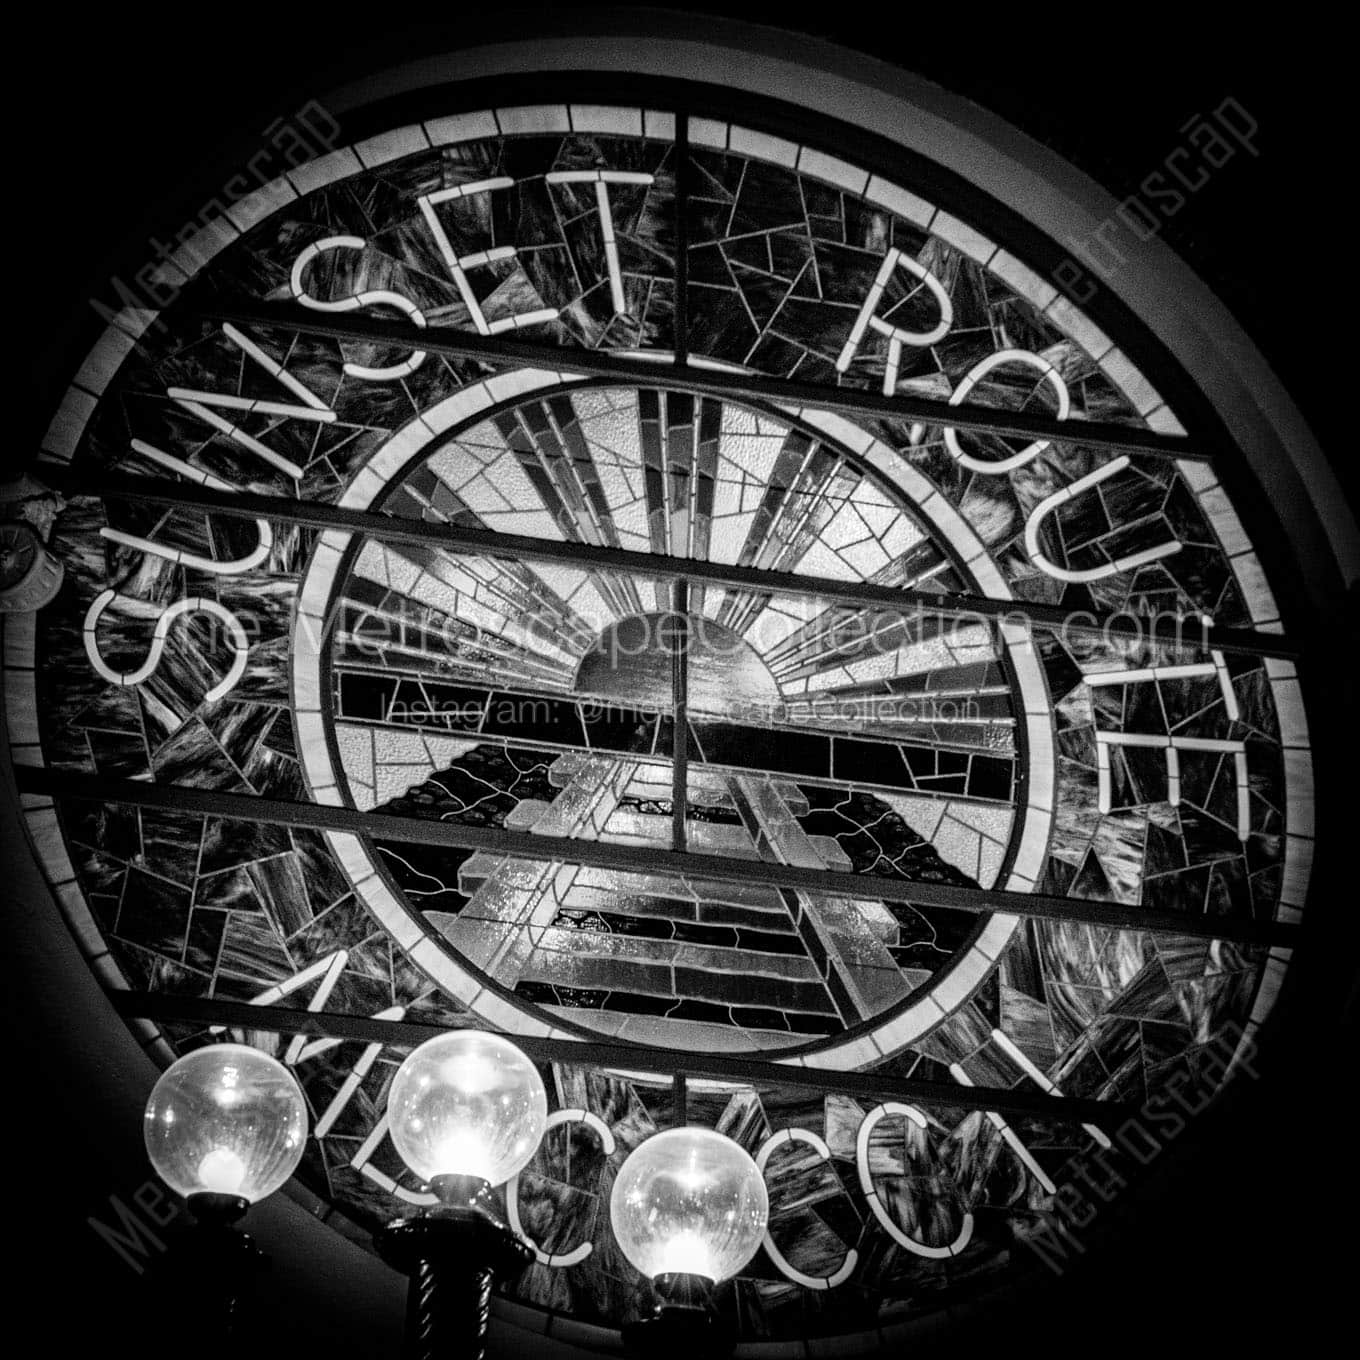 sunset route train station stained glass Black & White Wall Art